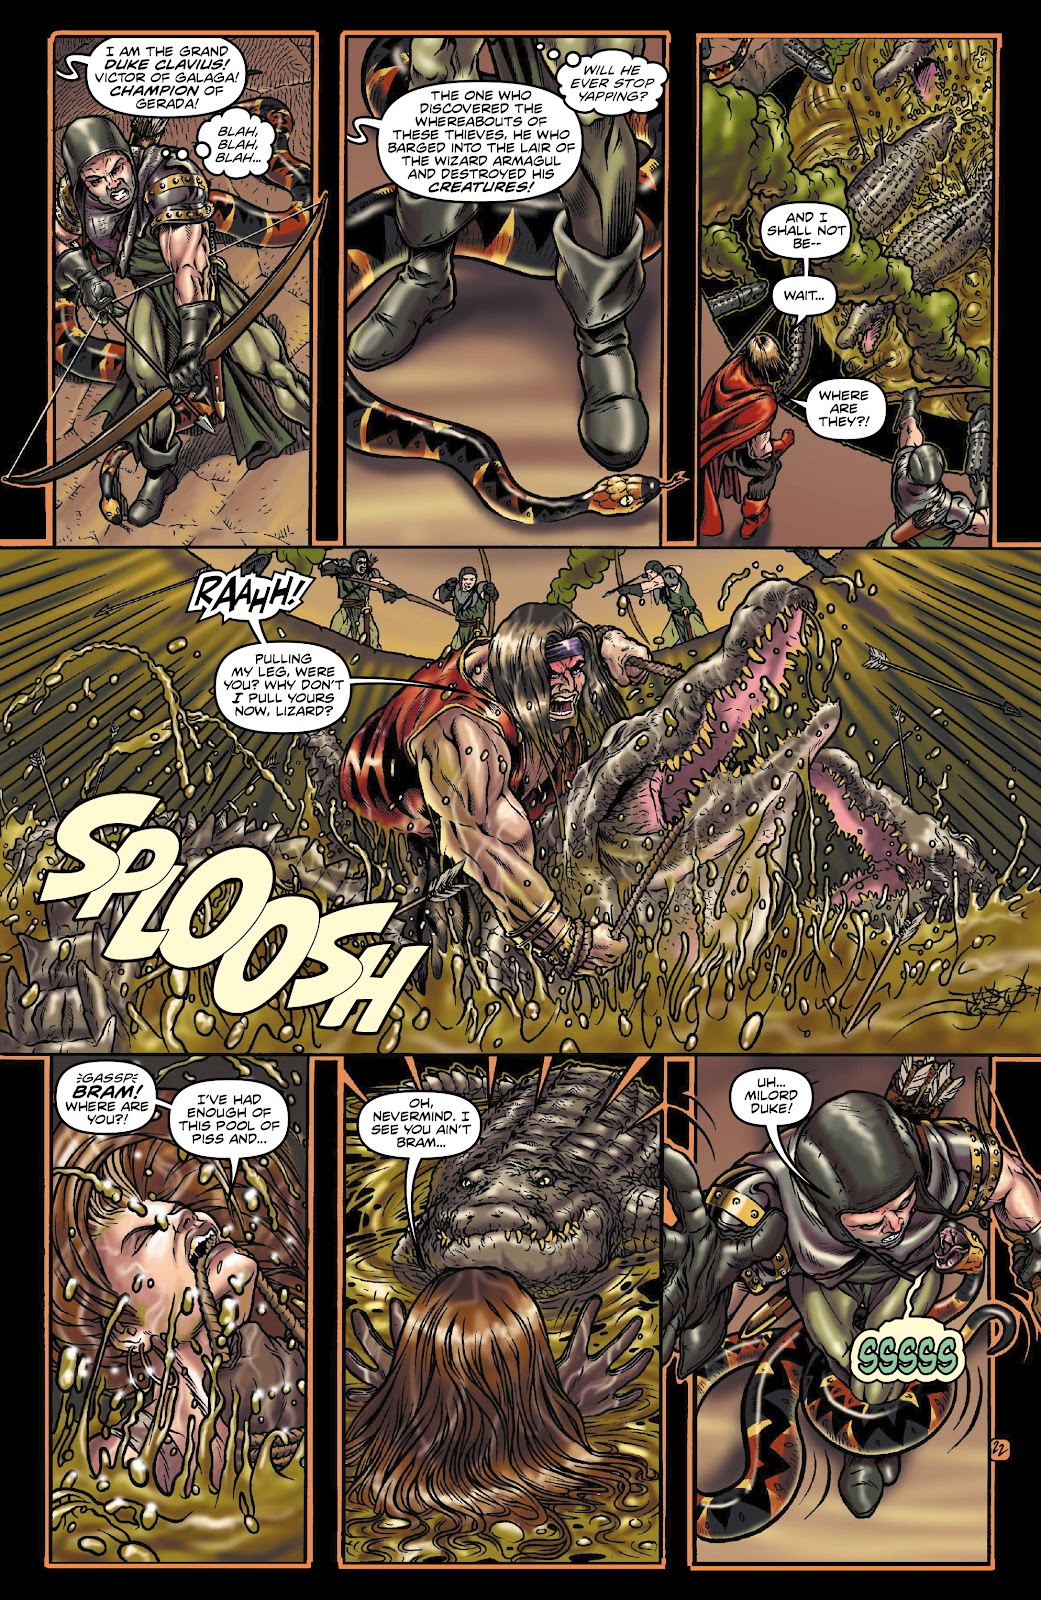 Rogues!: The Burning Heart issue 2 - Page 5